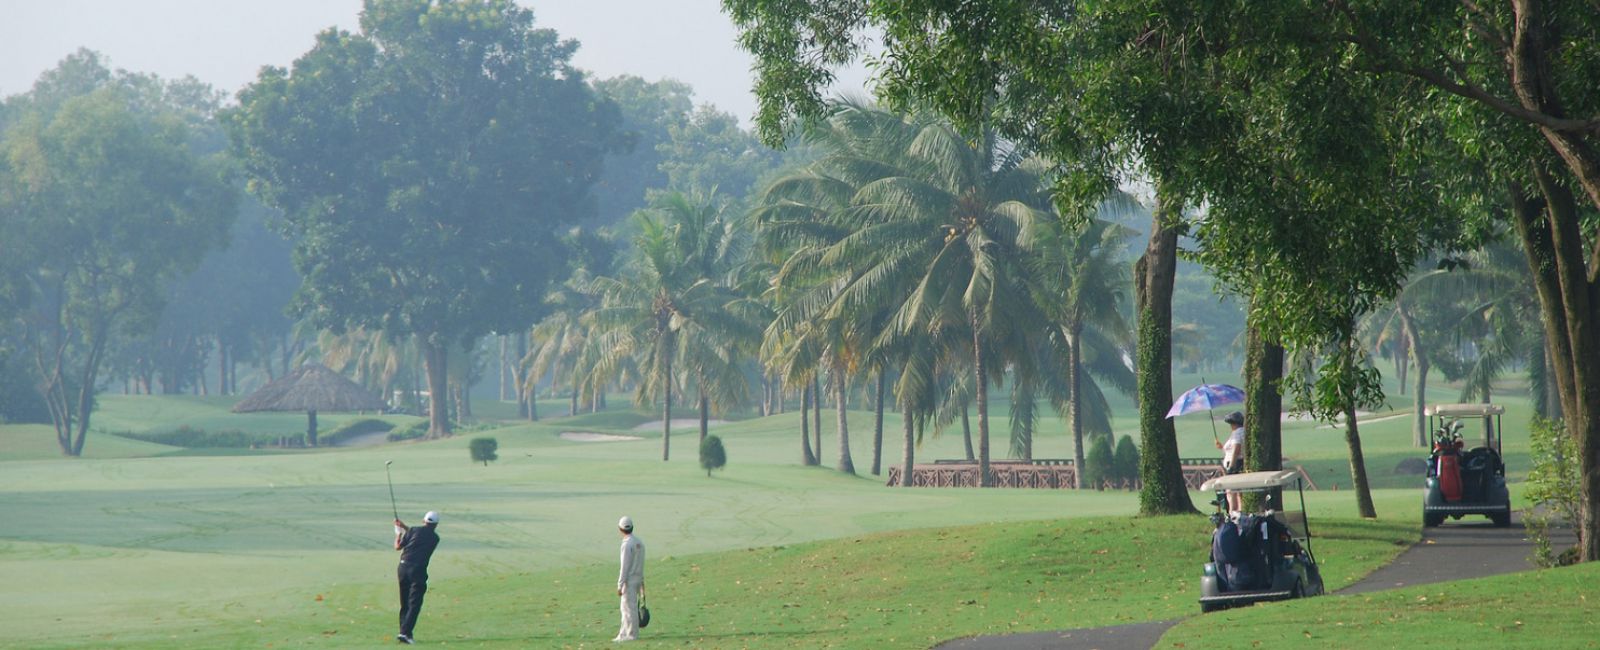 5 Day Golf Ho Chi Minh and Stay at Hotel des Arts